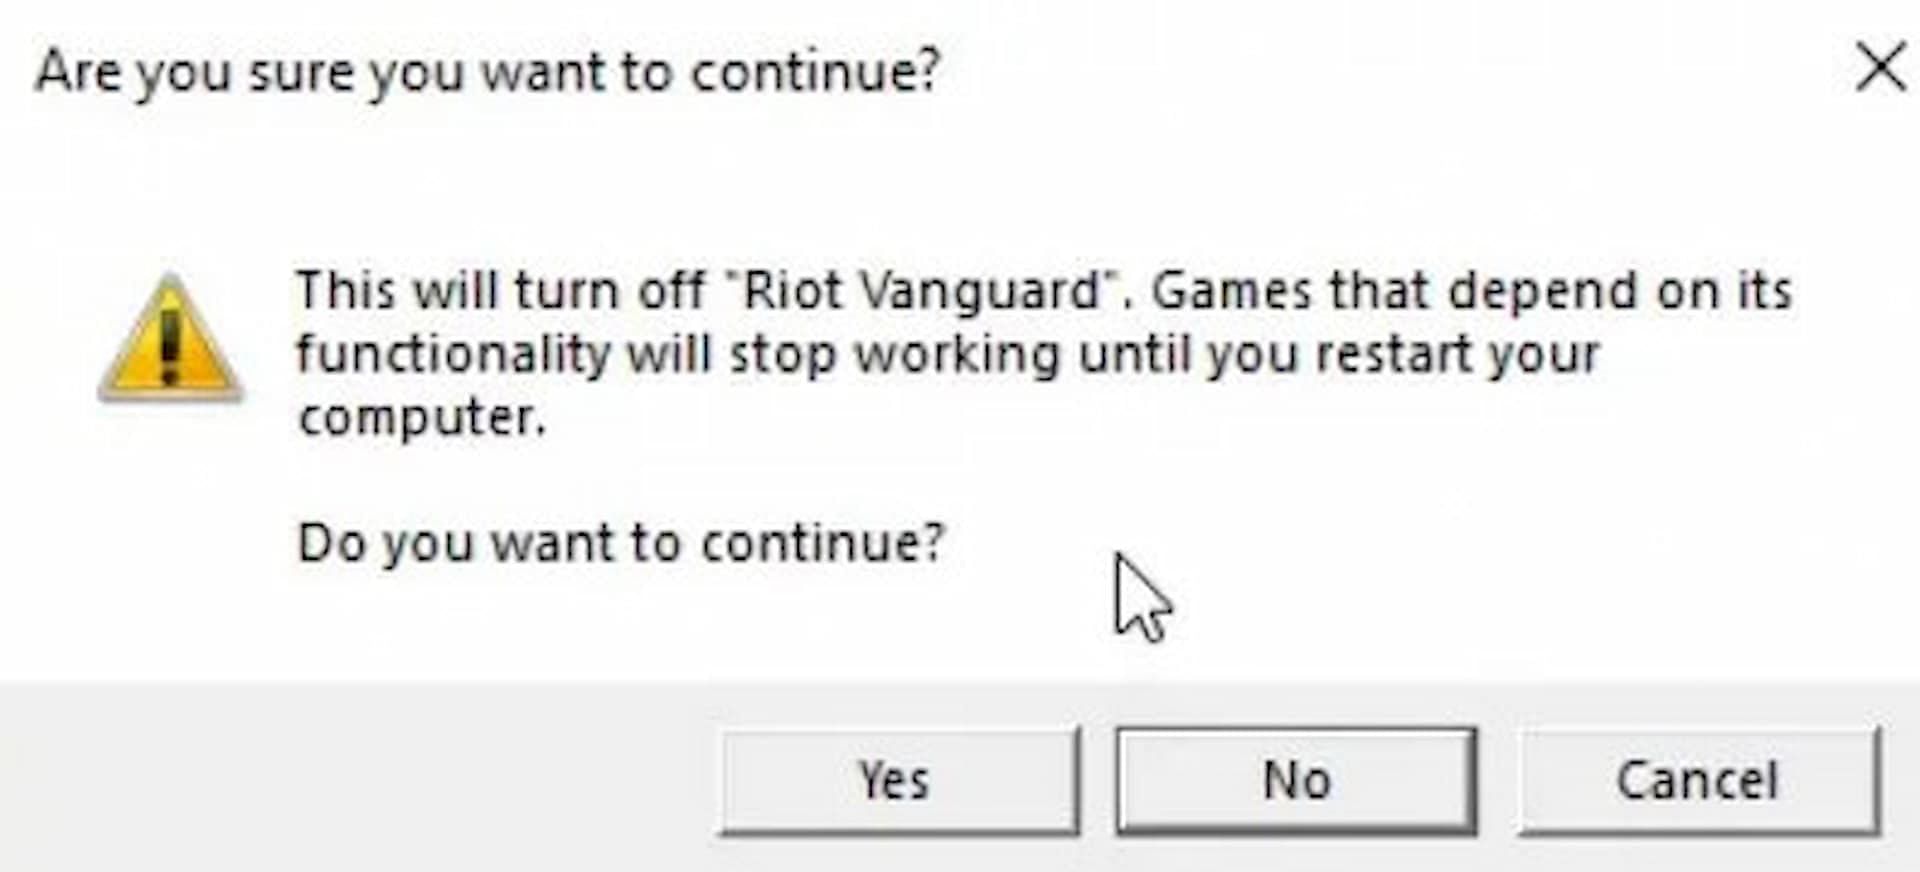 One of the steps to uninstall Vanguard. (Image via Riot Games)